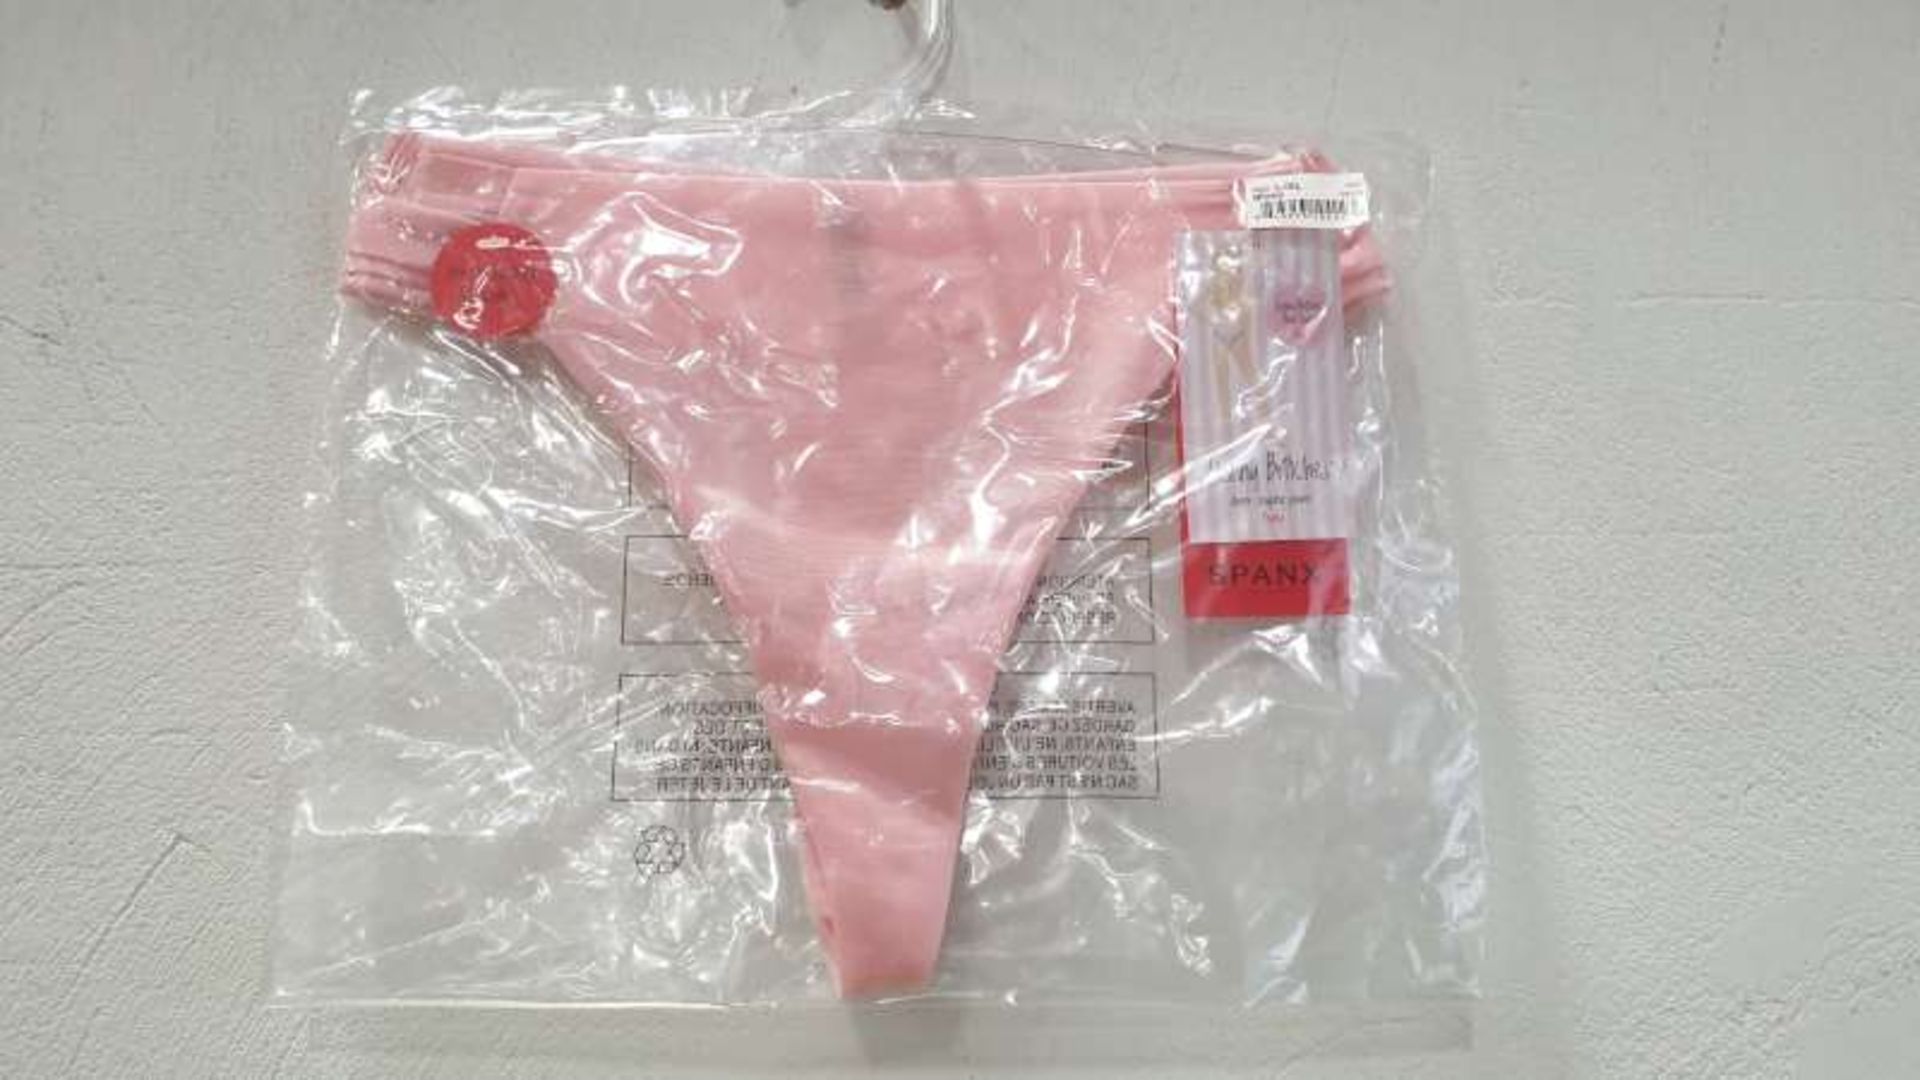 10 X SPANX SKINNY BRITCHES SHEER SHAPING POWER THONG'S SIZE L / XL COLOUR GLOSS